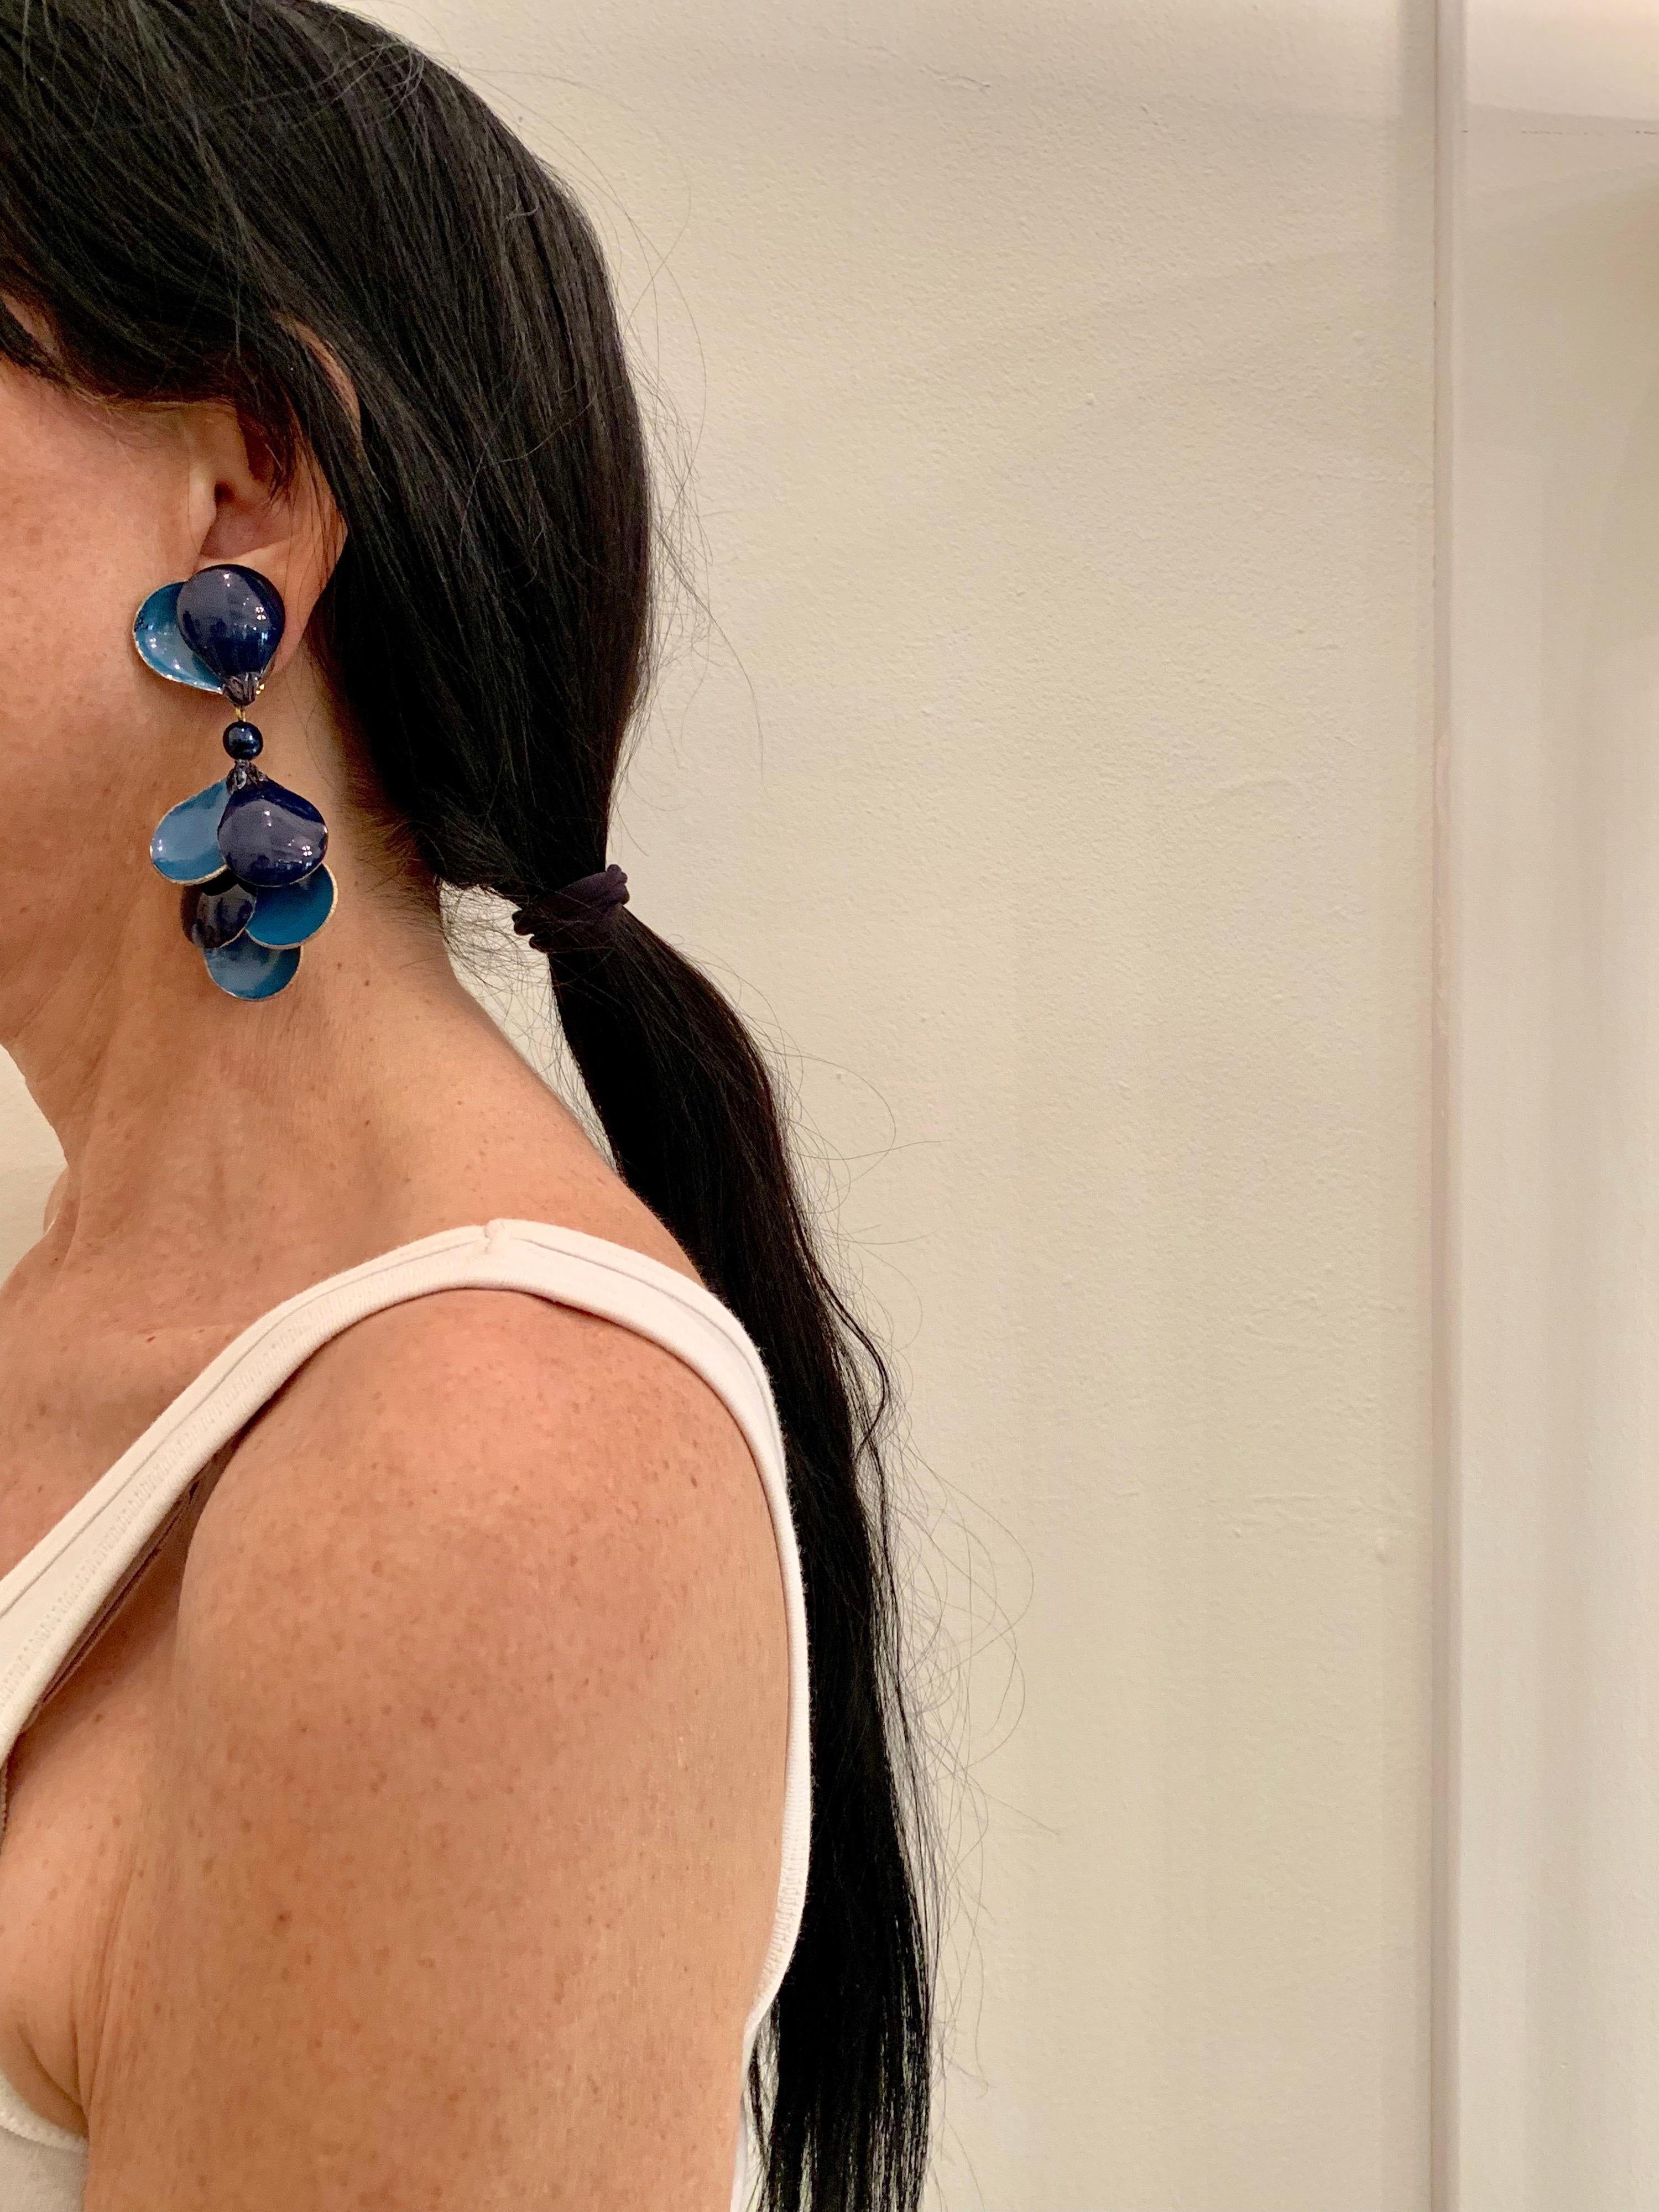 Contemporary French designer architectural blue chandelier statement clip-on earrings made in Paris by Cilea - the lightweight chic earrings are comprised of enameline (enamel and resin) and feature a bold/unique. Cilea Paris is known for creating